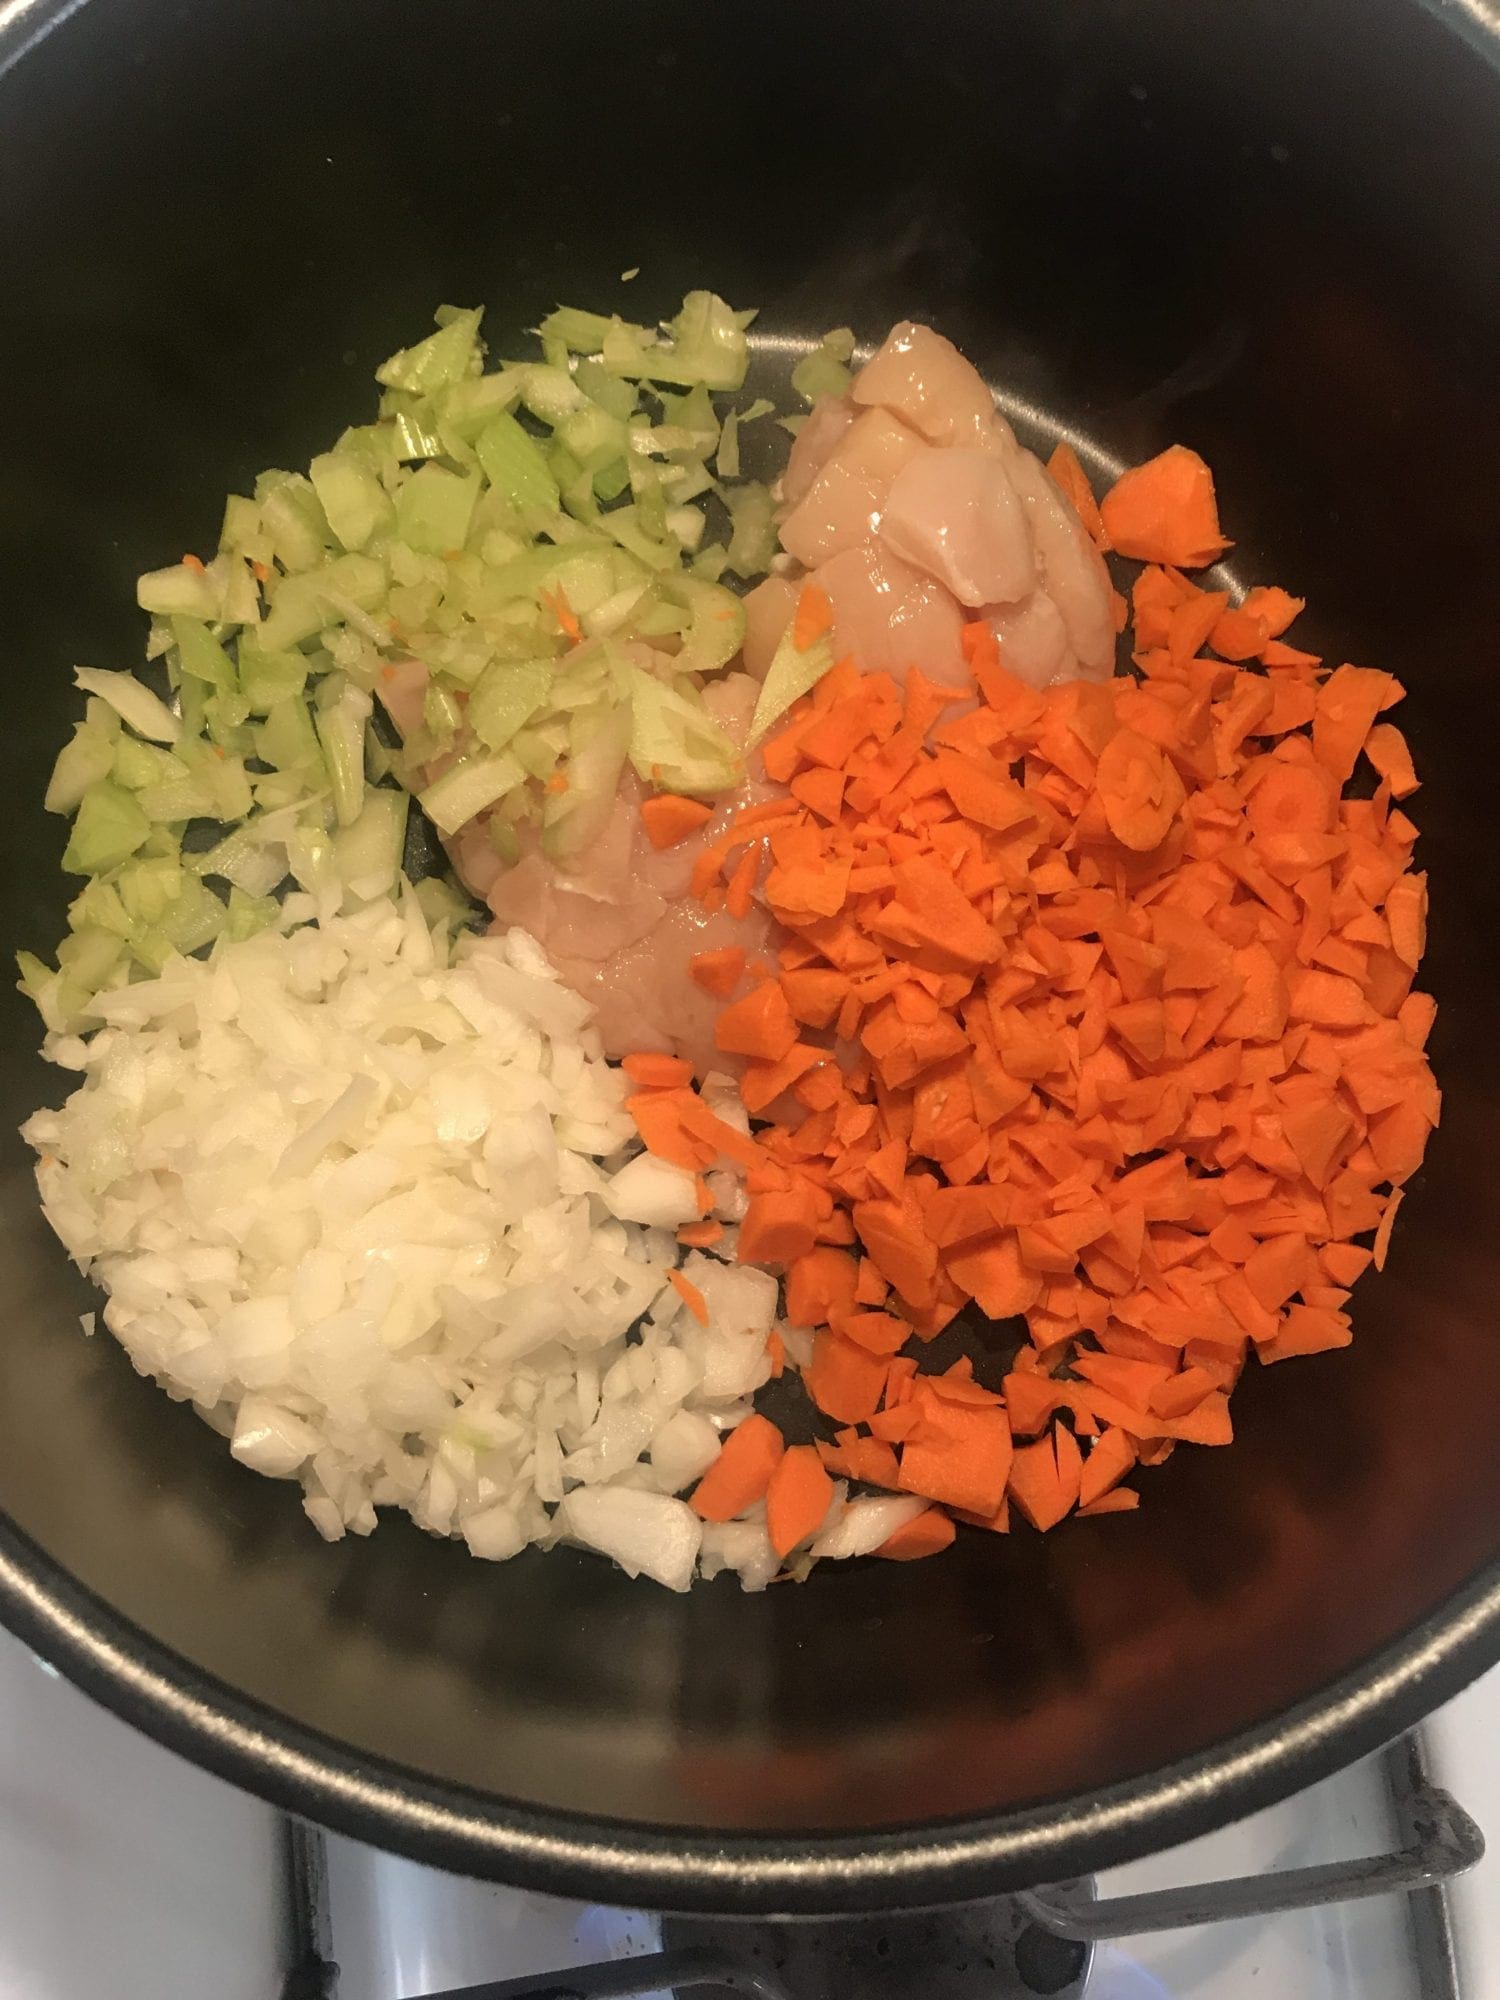 Cook the chicken, onion, celery, and carrots first.